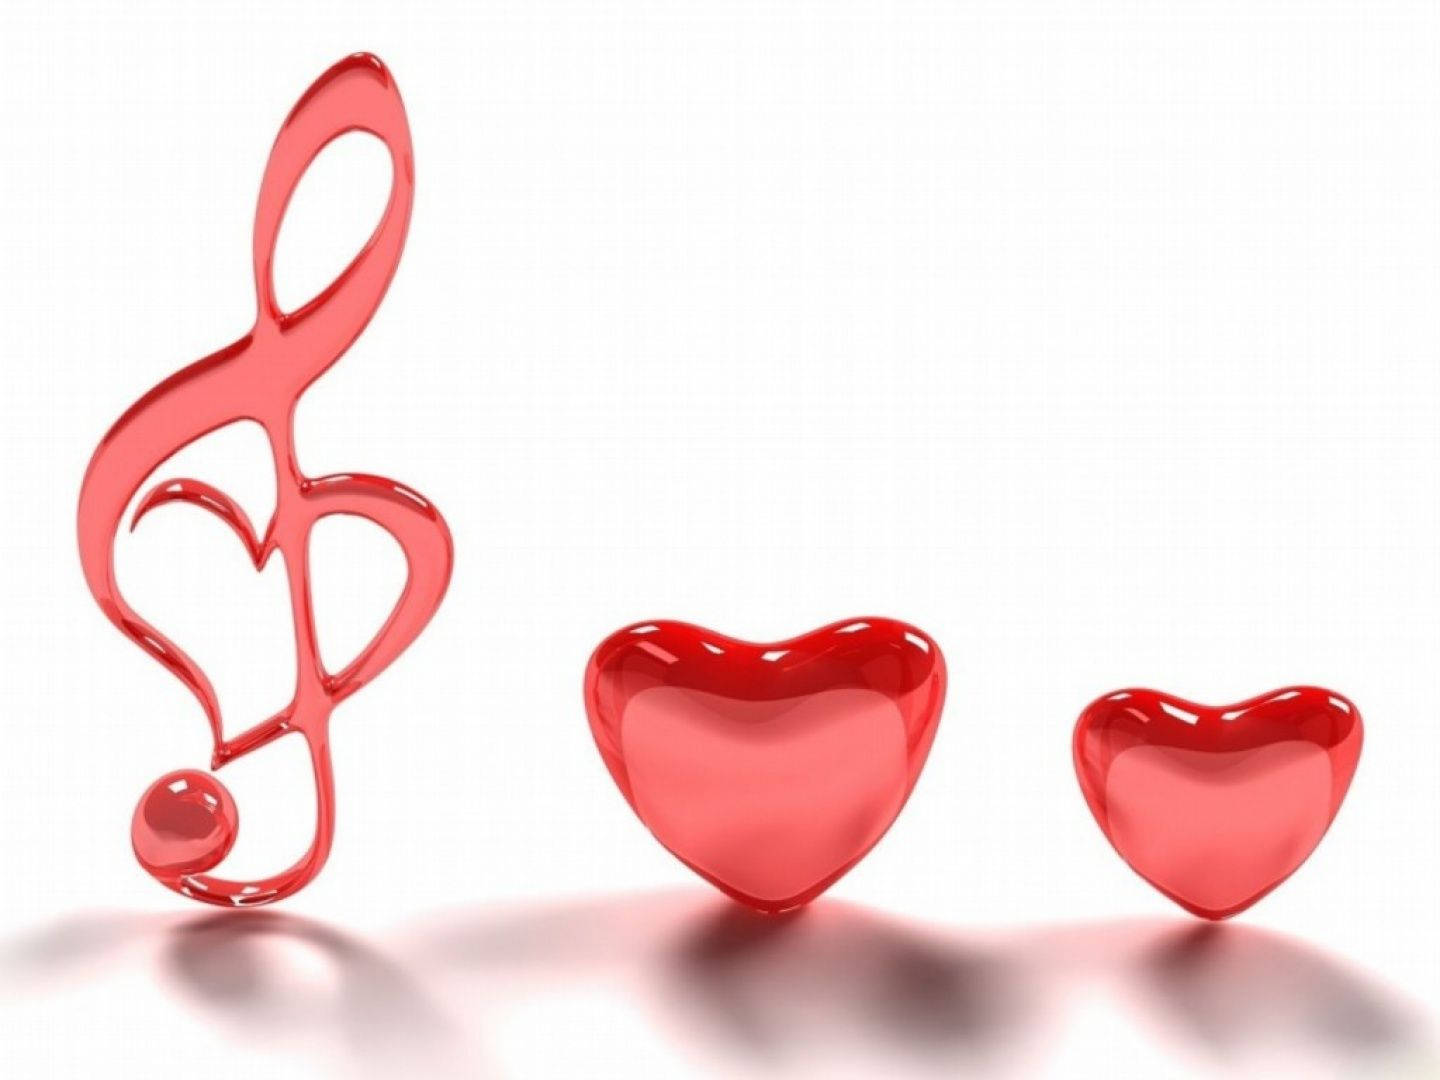 Music Symbols with Red Hearts for Tablet Wallpaper